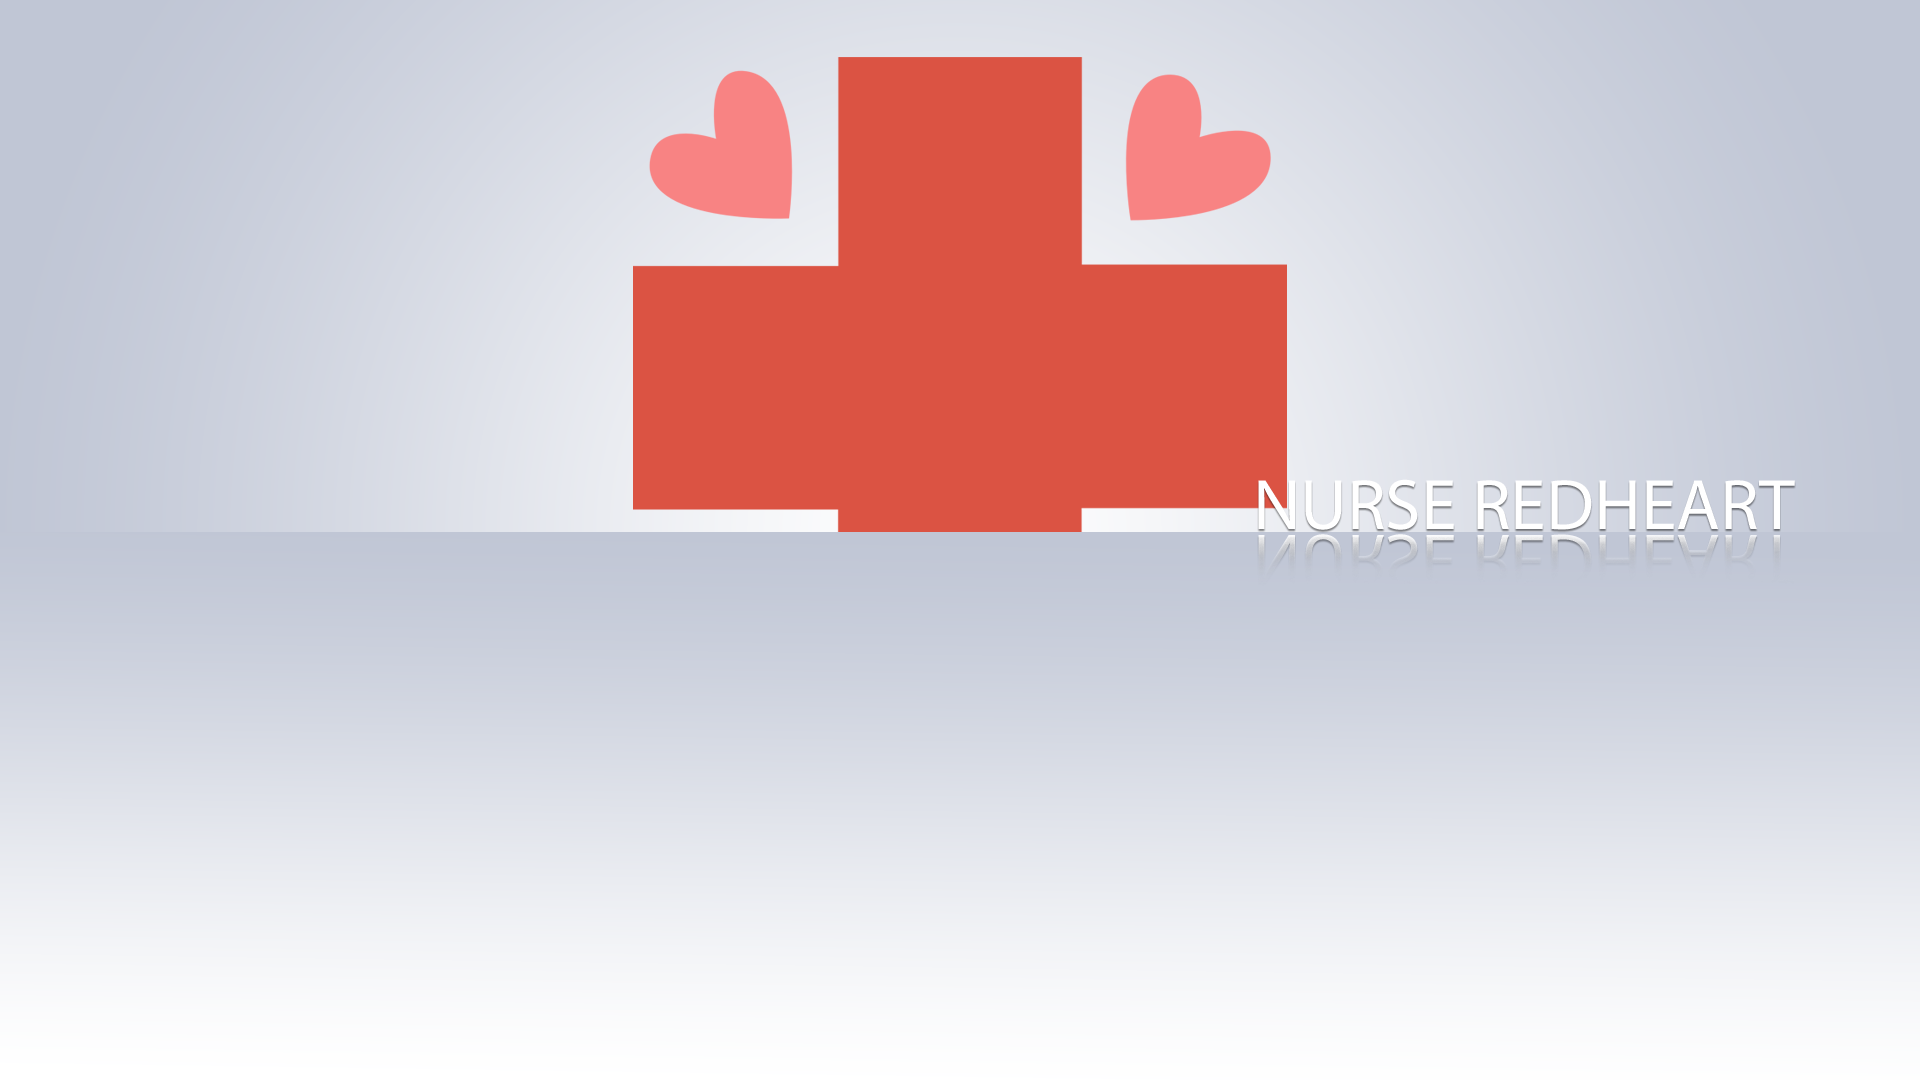 Nurse Redheart Minimalistic Wallpaper by BlueDragonHans and The-Smiling-Pony